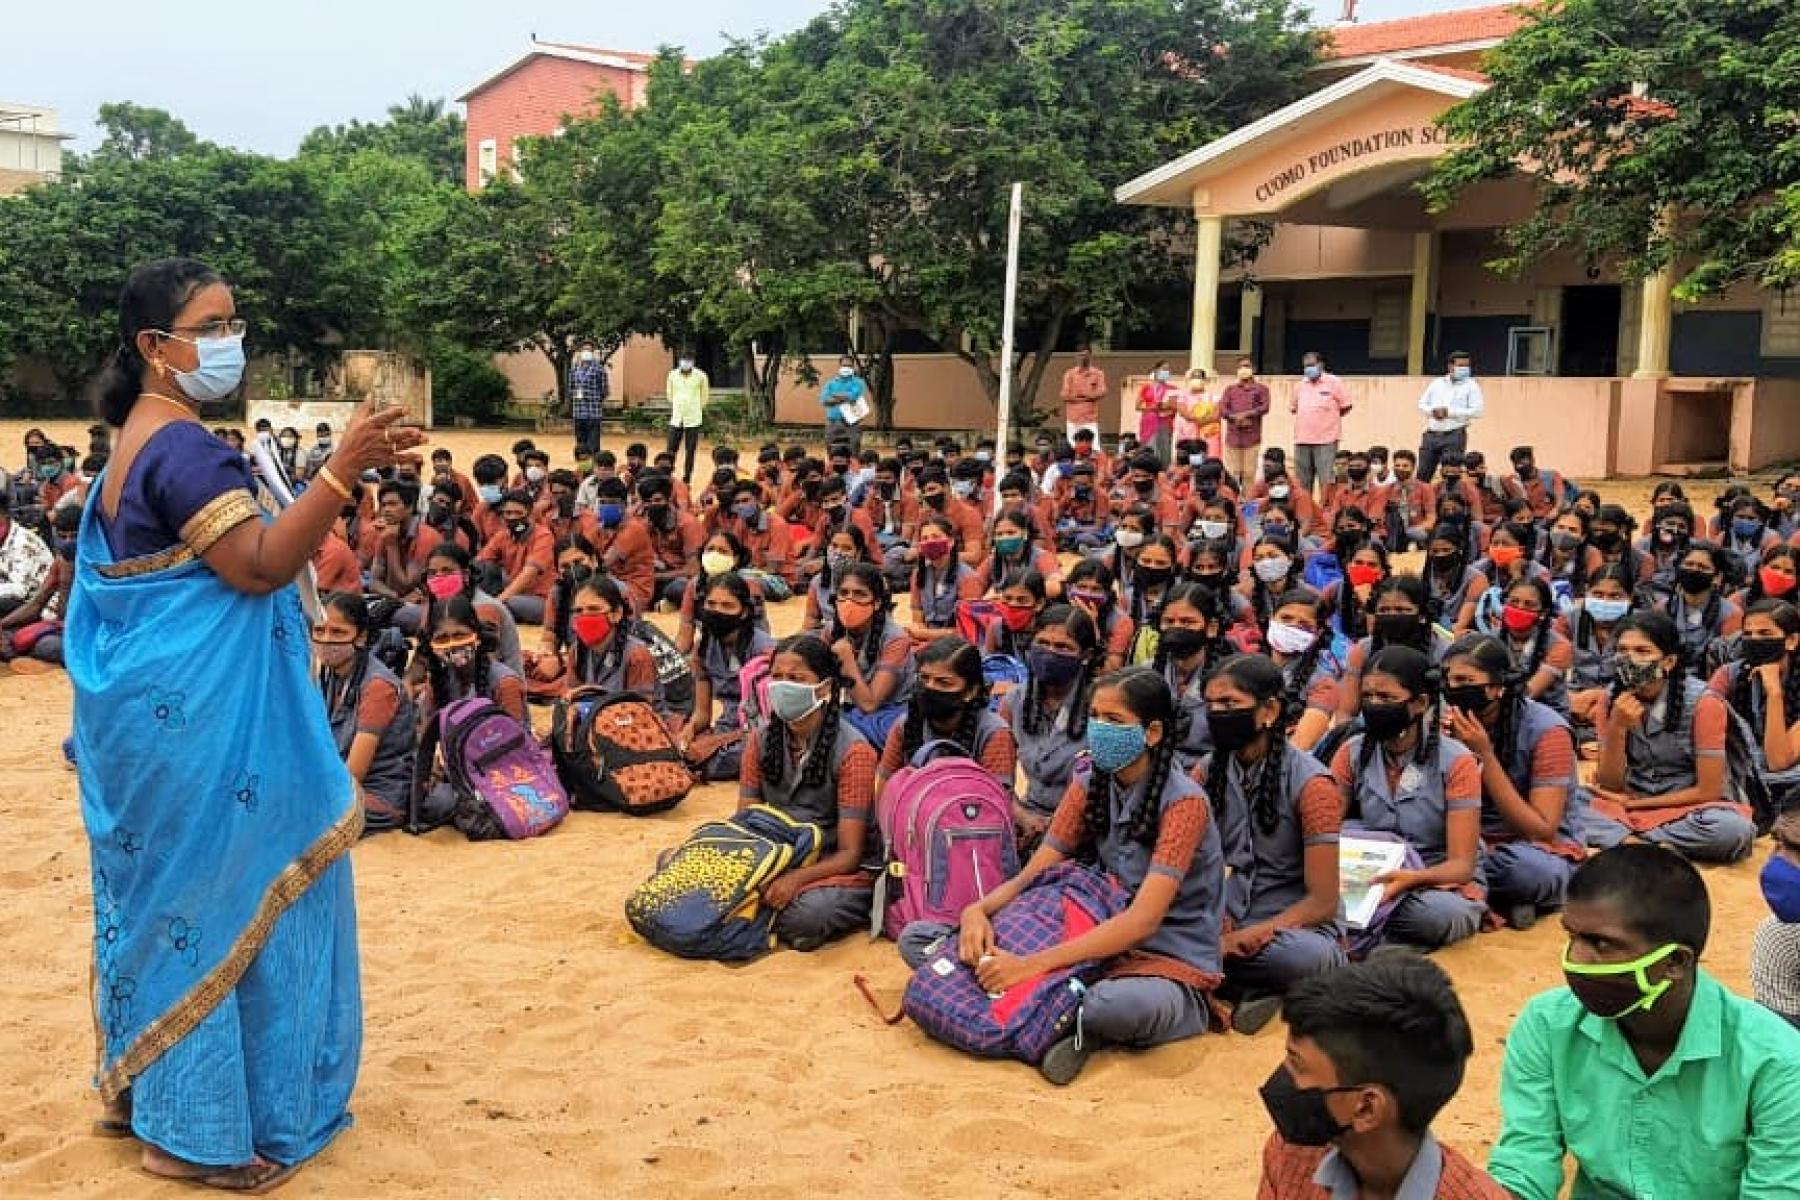 Partial Reopening of Schools and Colleges in Tamil Nadu, India